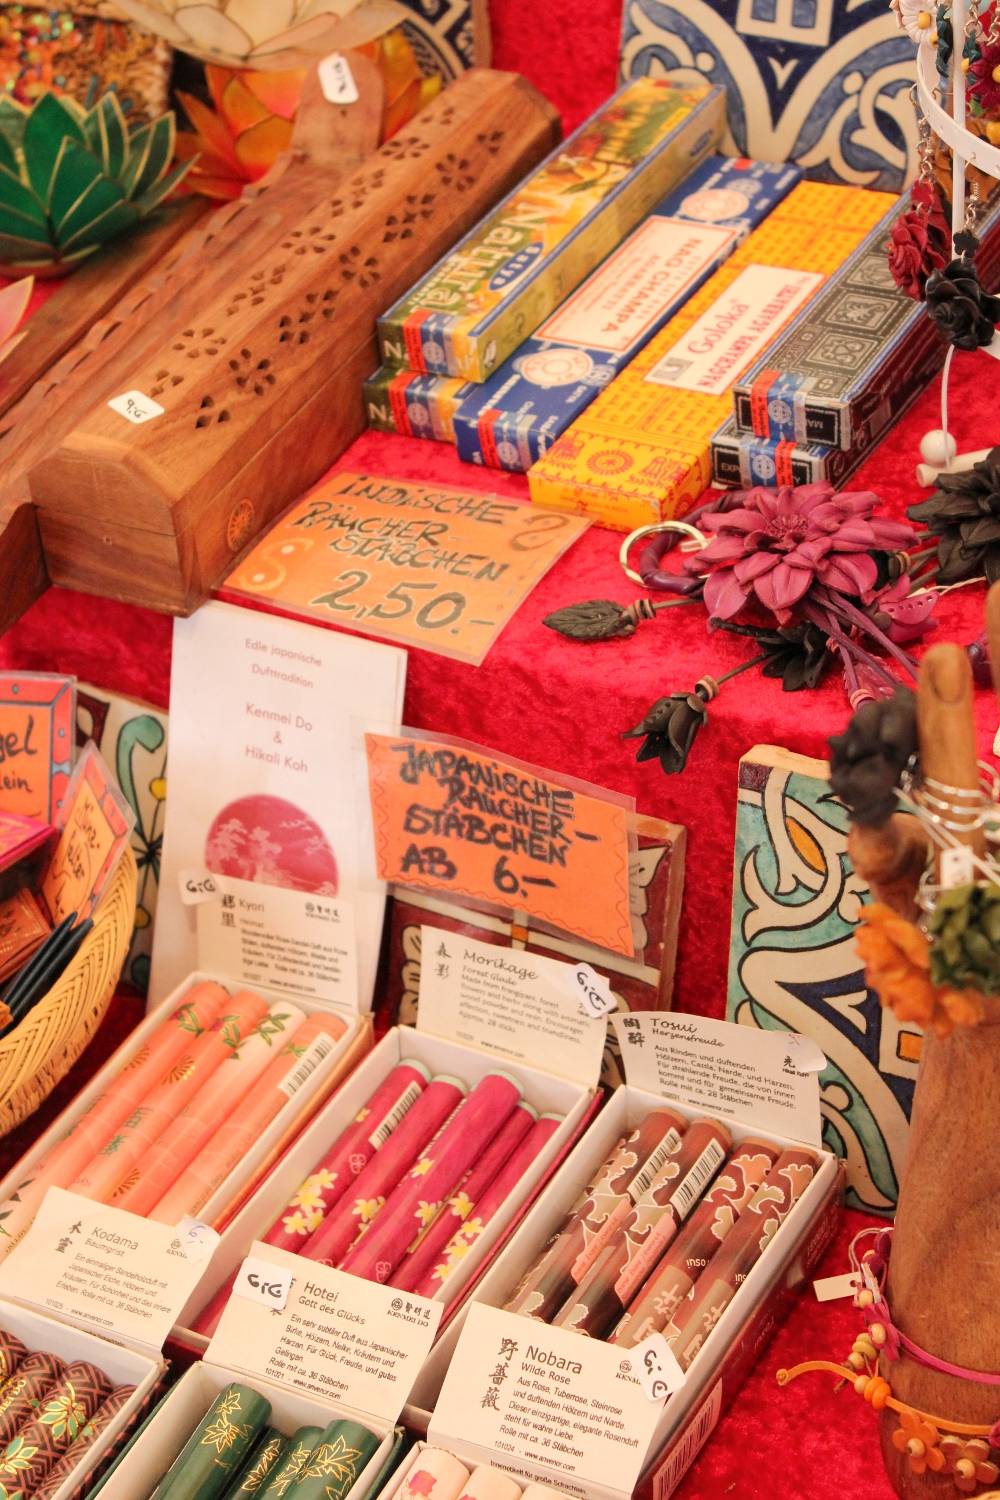 Variety of Incense sticks sold at a market